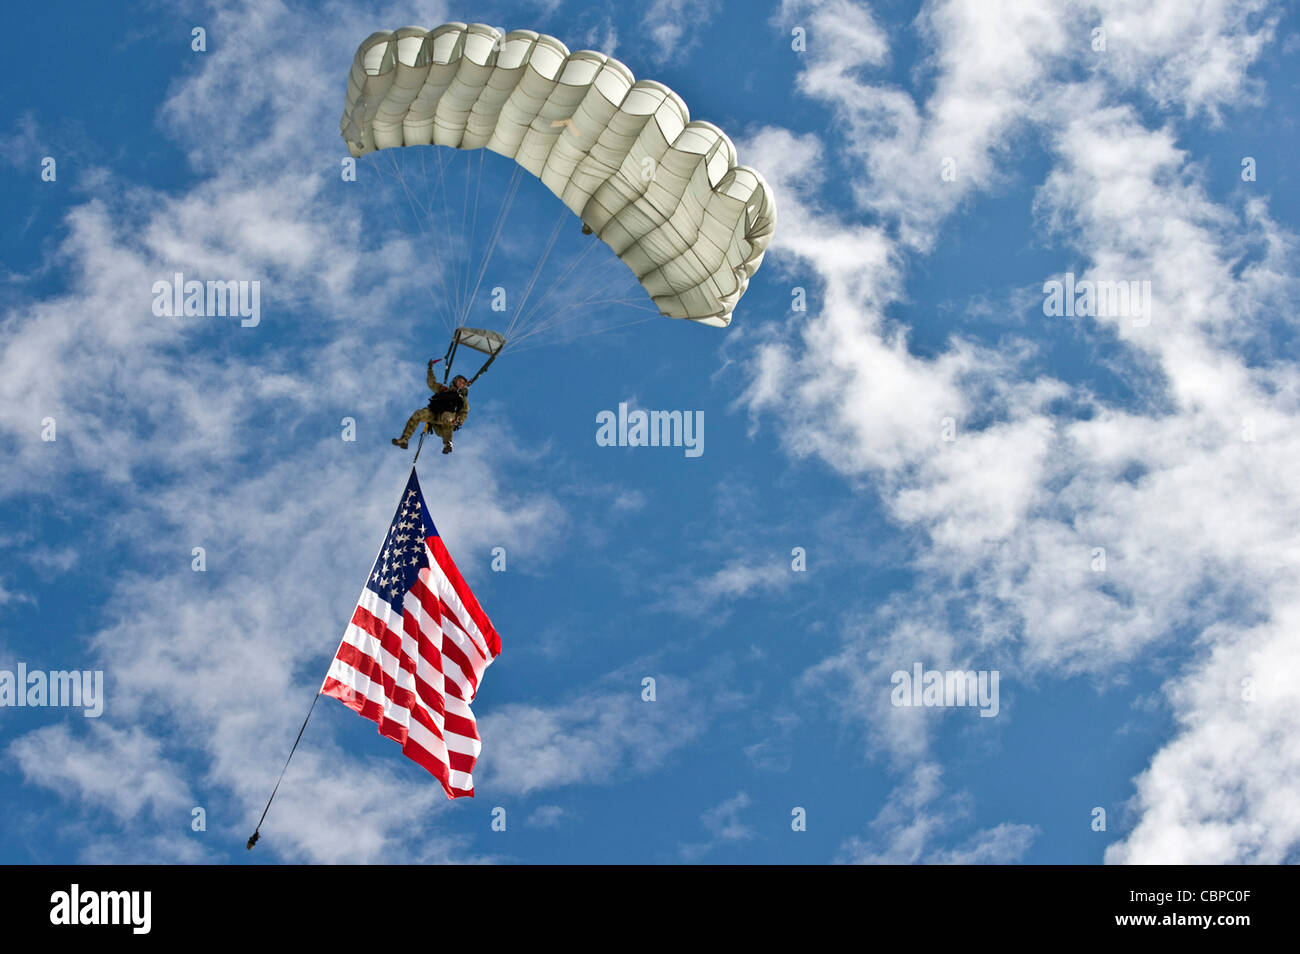 A U.S. Air Force combat controller jumps with the American flag during the 2011 Aviation Nation Open House Nov. 12, at Nellis Air Force Base, Nev. Aviation Nation celebrates 70 years of airpower in Las Vegas and the Air Force's accomplishments in air, space and cyberspace. Stock Photo